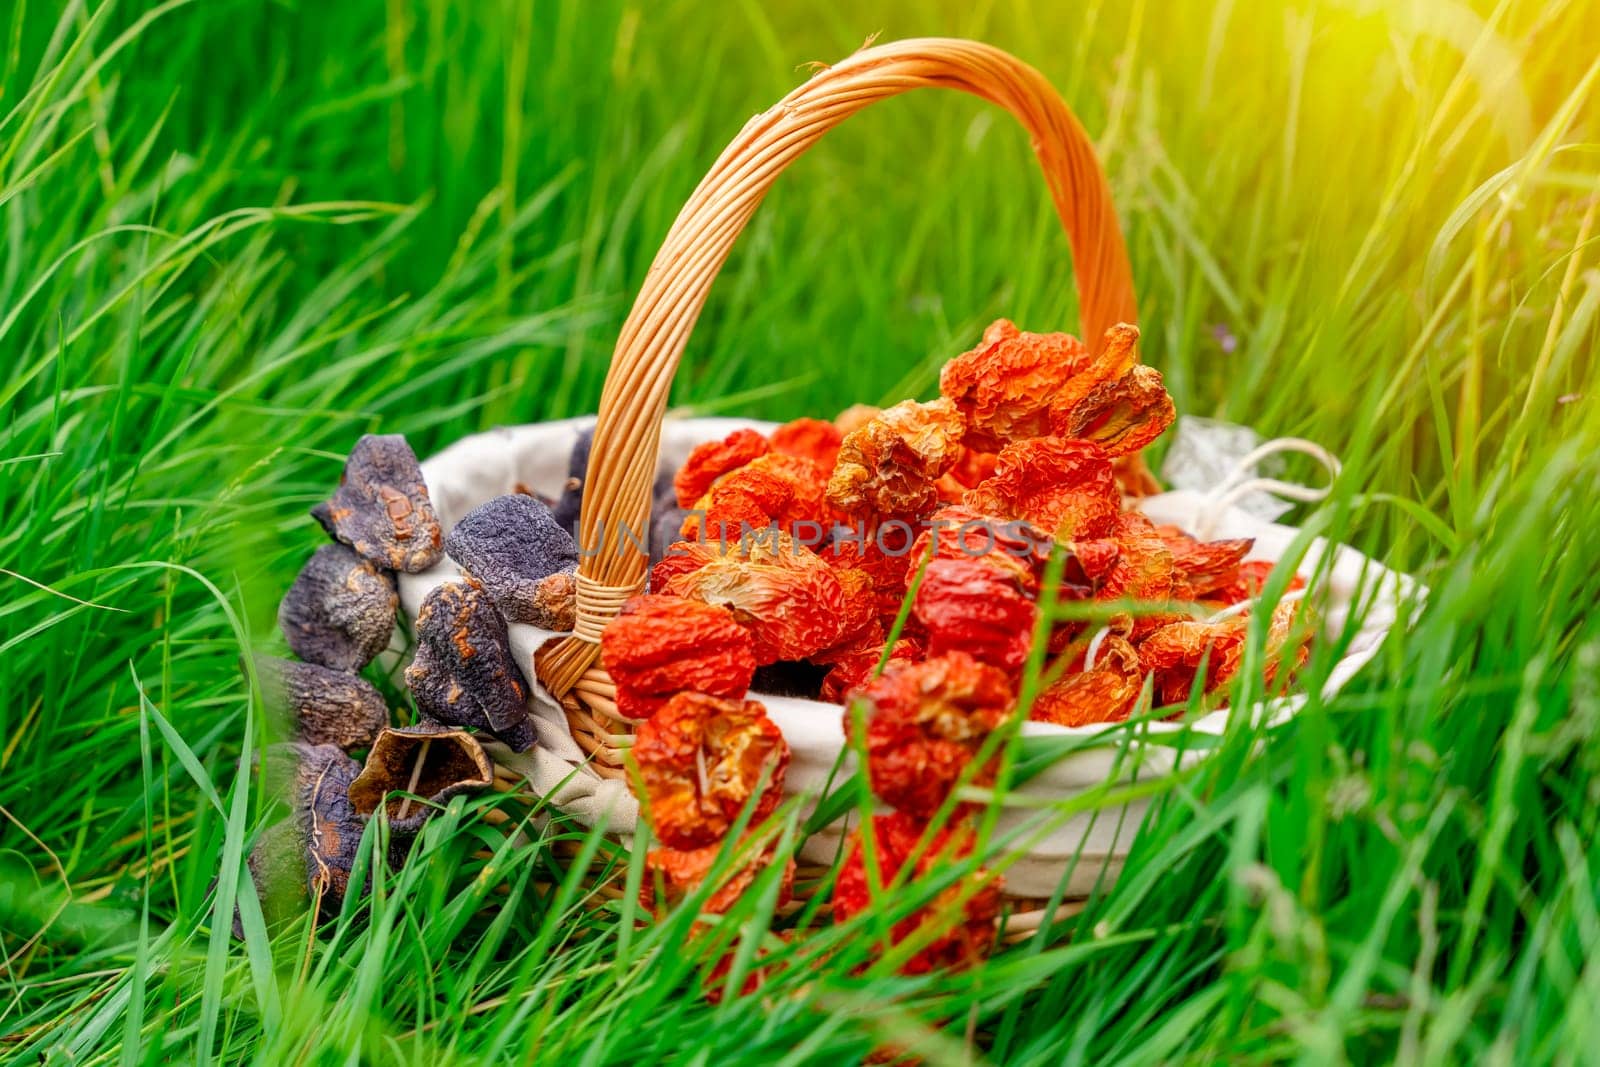 basket with Dried Bell Pepper and Dried Stuffed Eggplant in the grass for a picnic